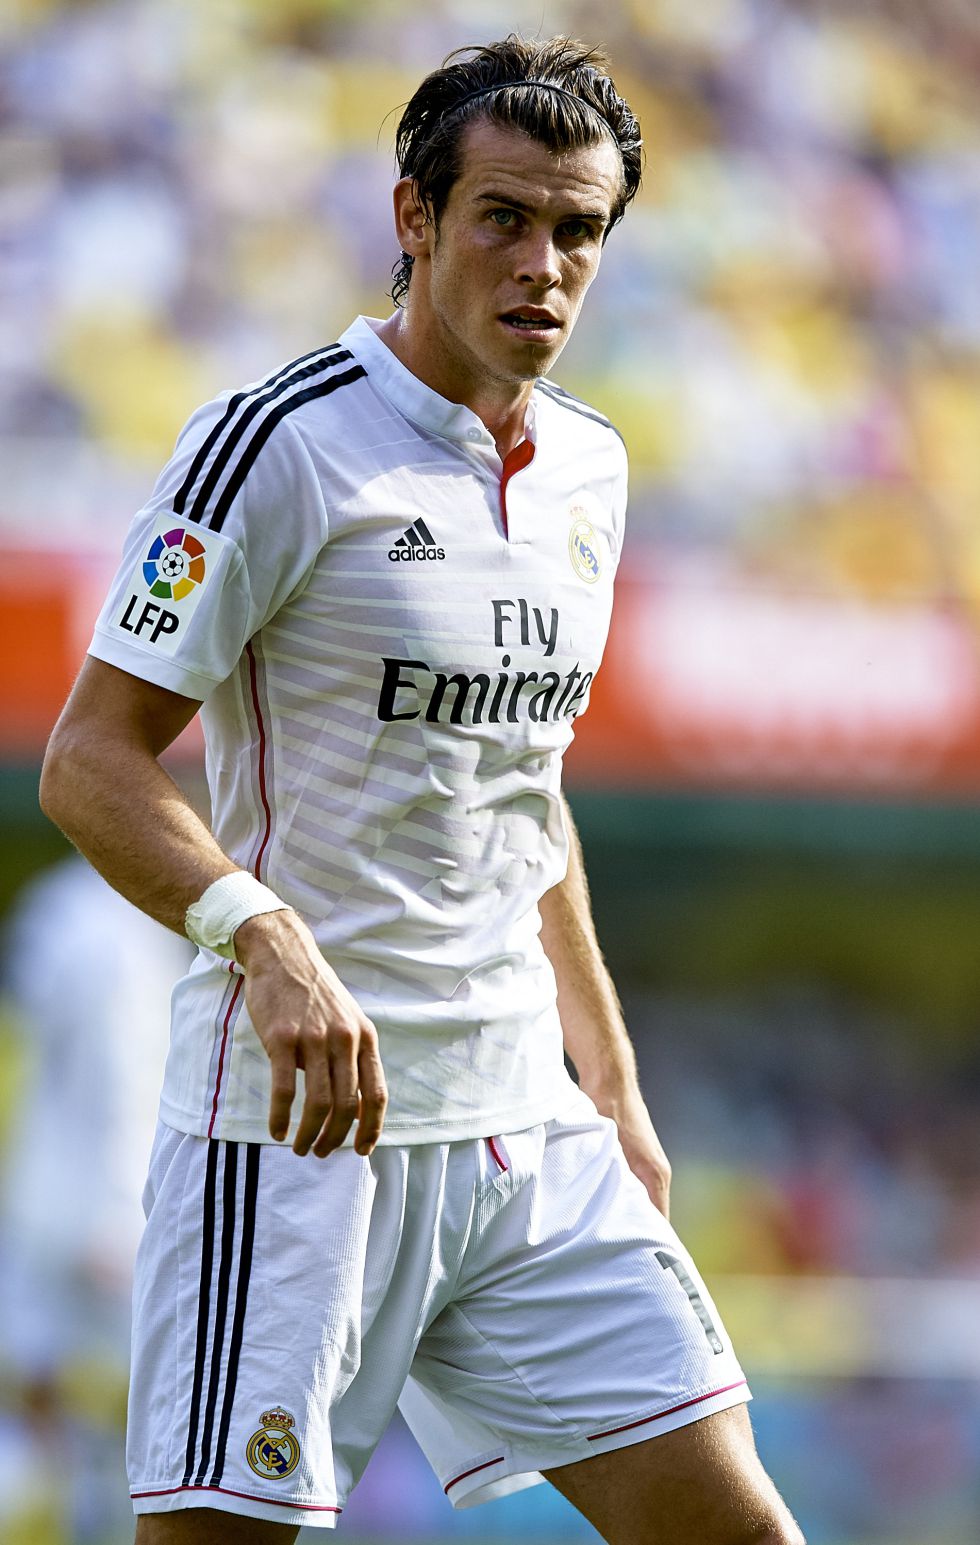 Gareth Bale hairstyle with Headband and Slicked Back Hair